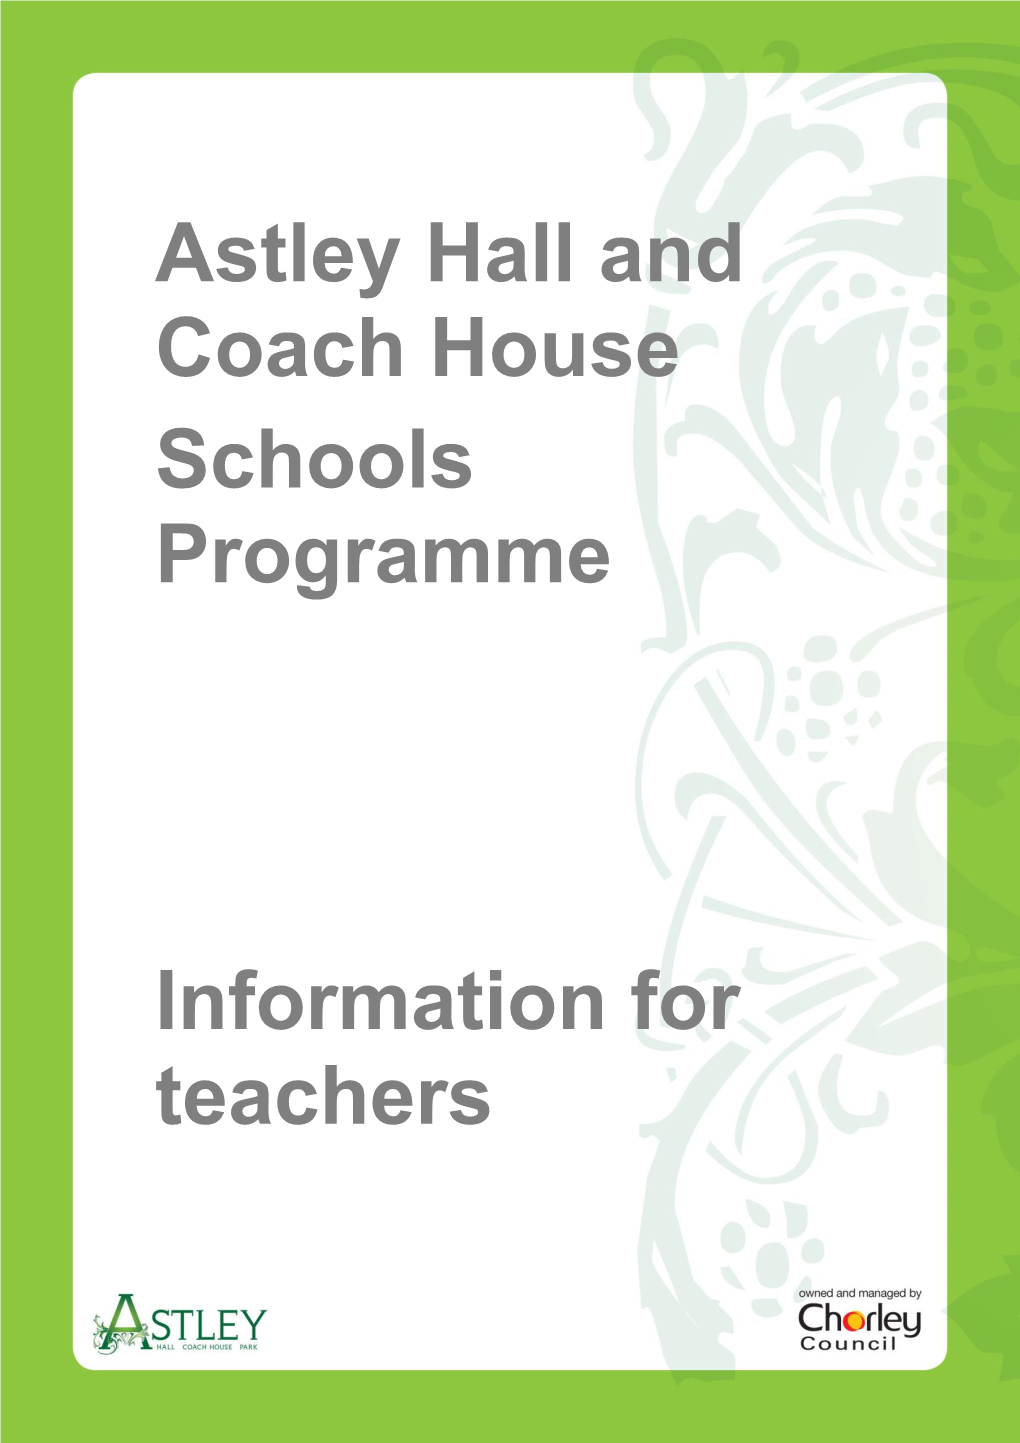 Astley Hall and Coach House Schools Programme Information for Teachers